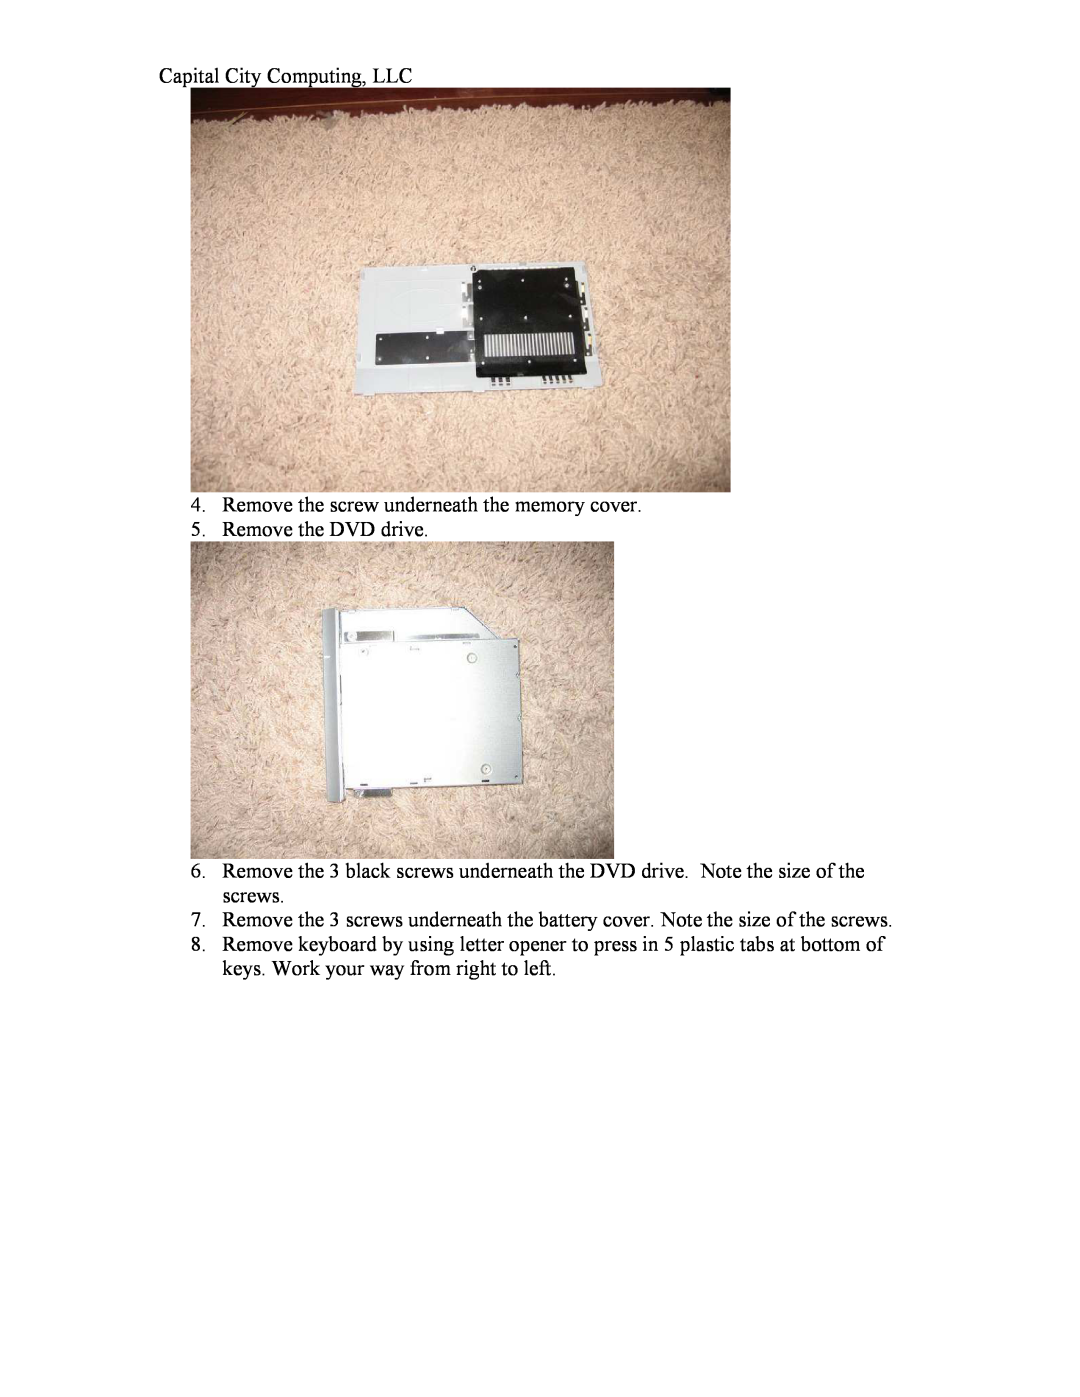 Sony 7x2l service manual Remove the screw underneath the memory cover, Remove the DVD drive, Capital City Computing, LLC 